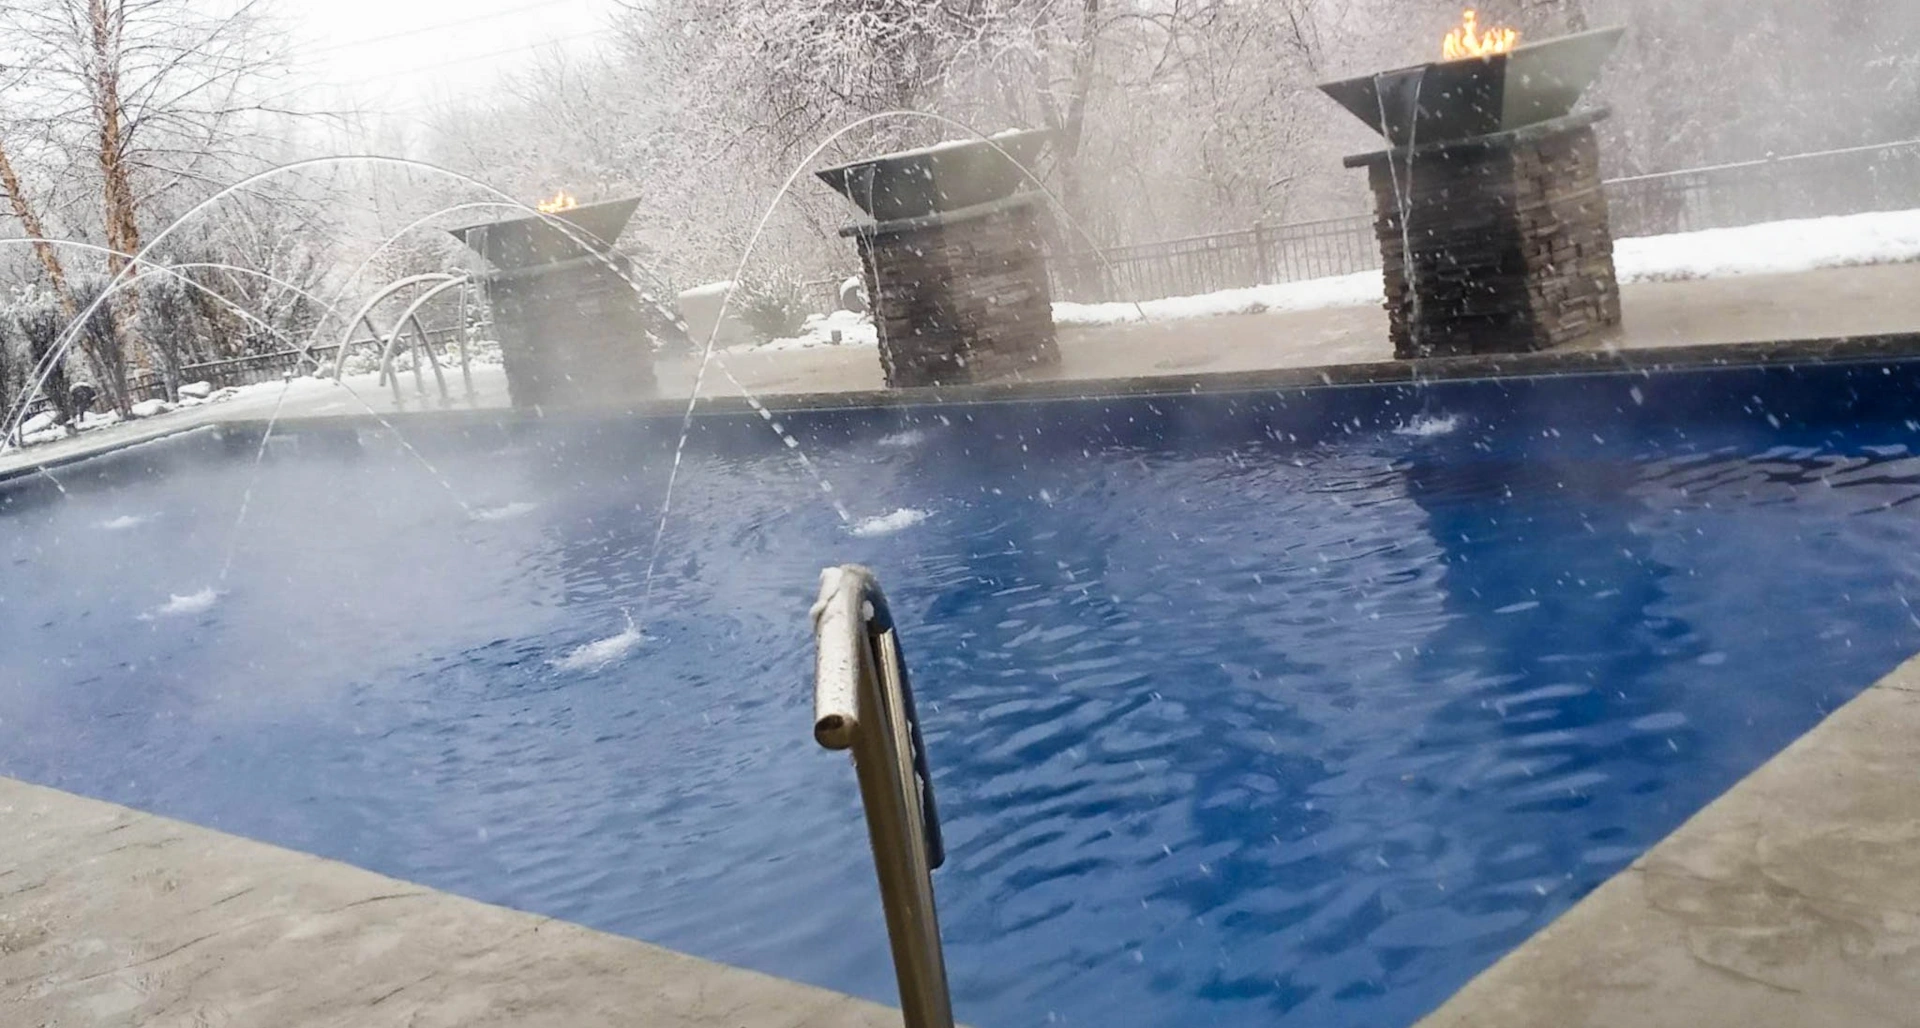 A rectangular inground pool with blue liner and deck jets sits in snowy Iowa outdoors. Conditions like these spark the question "Is a pool heater worth the investment?"